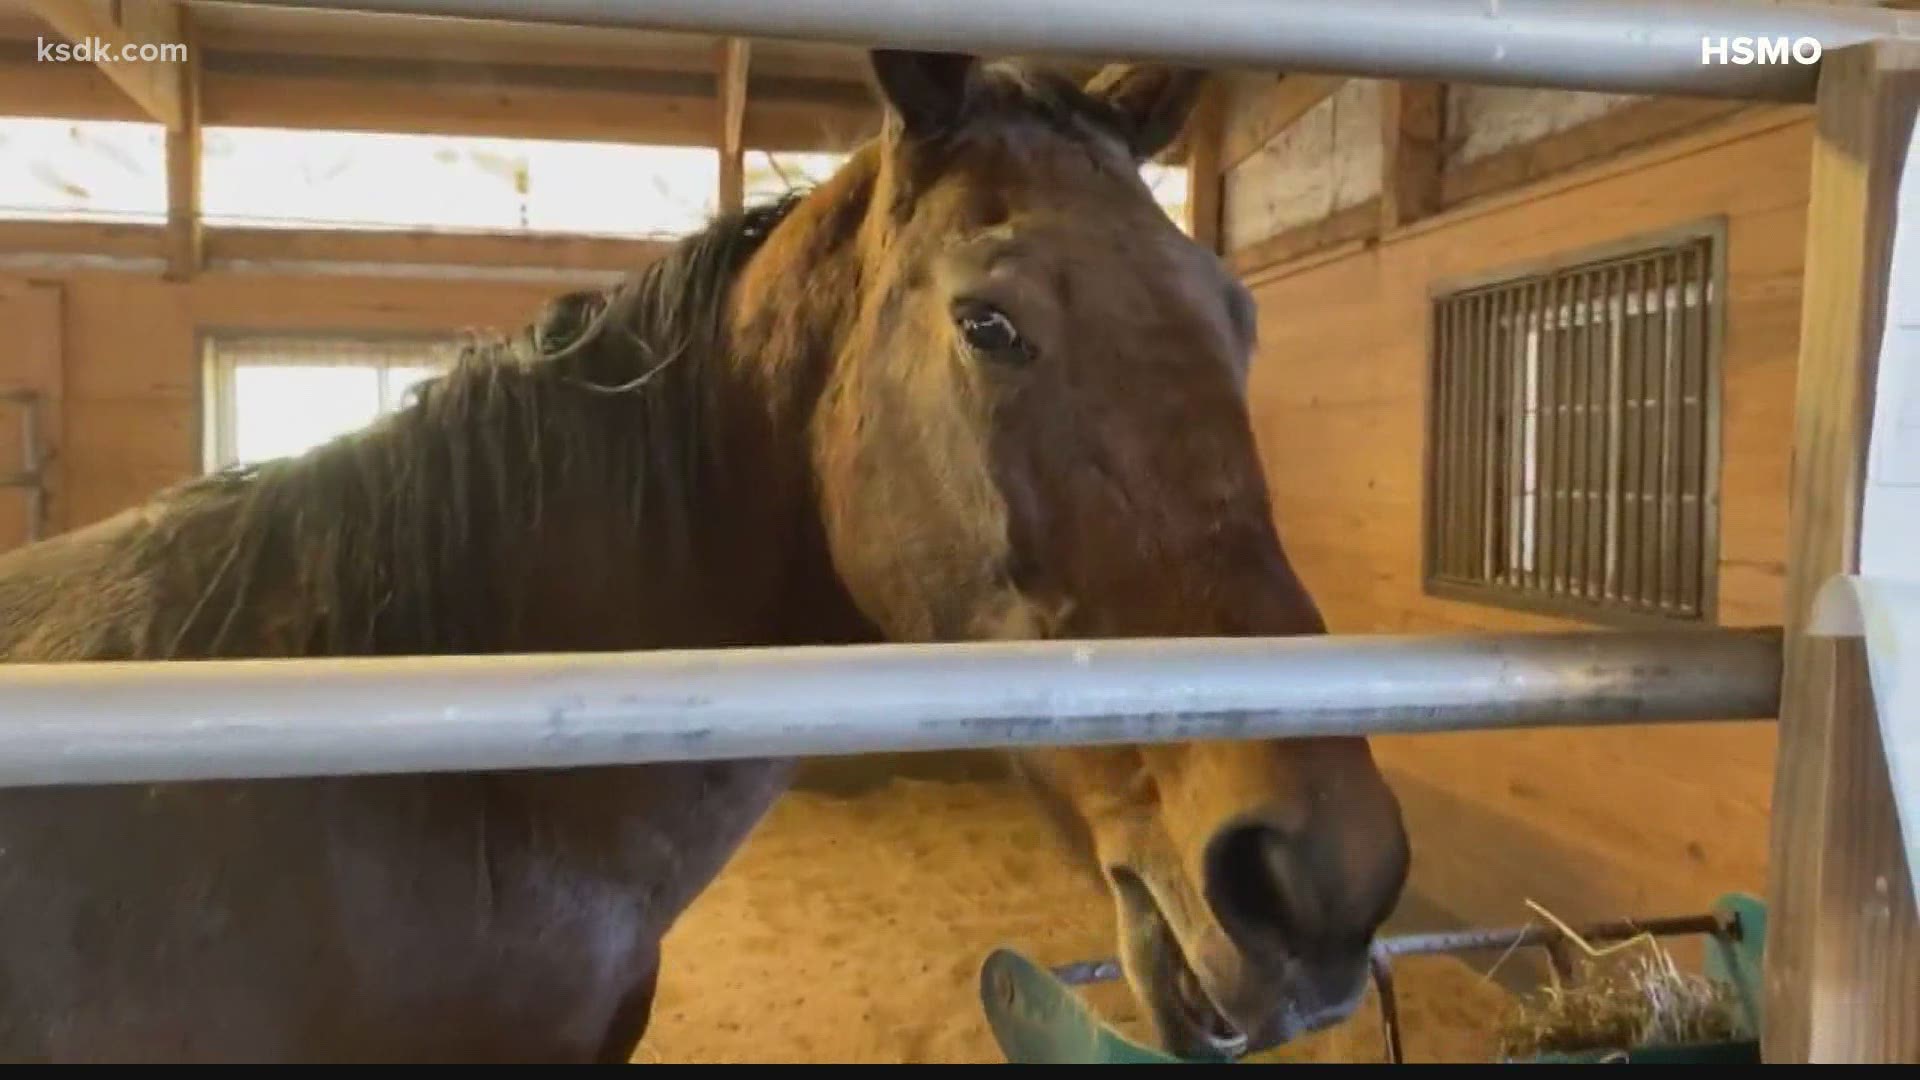 The humane society said it is taking $100 off all horse adoption fees now through Feb. 27.